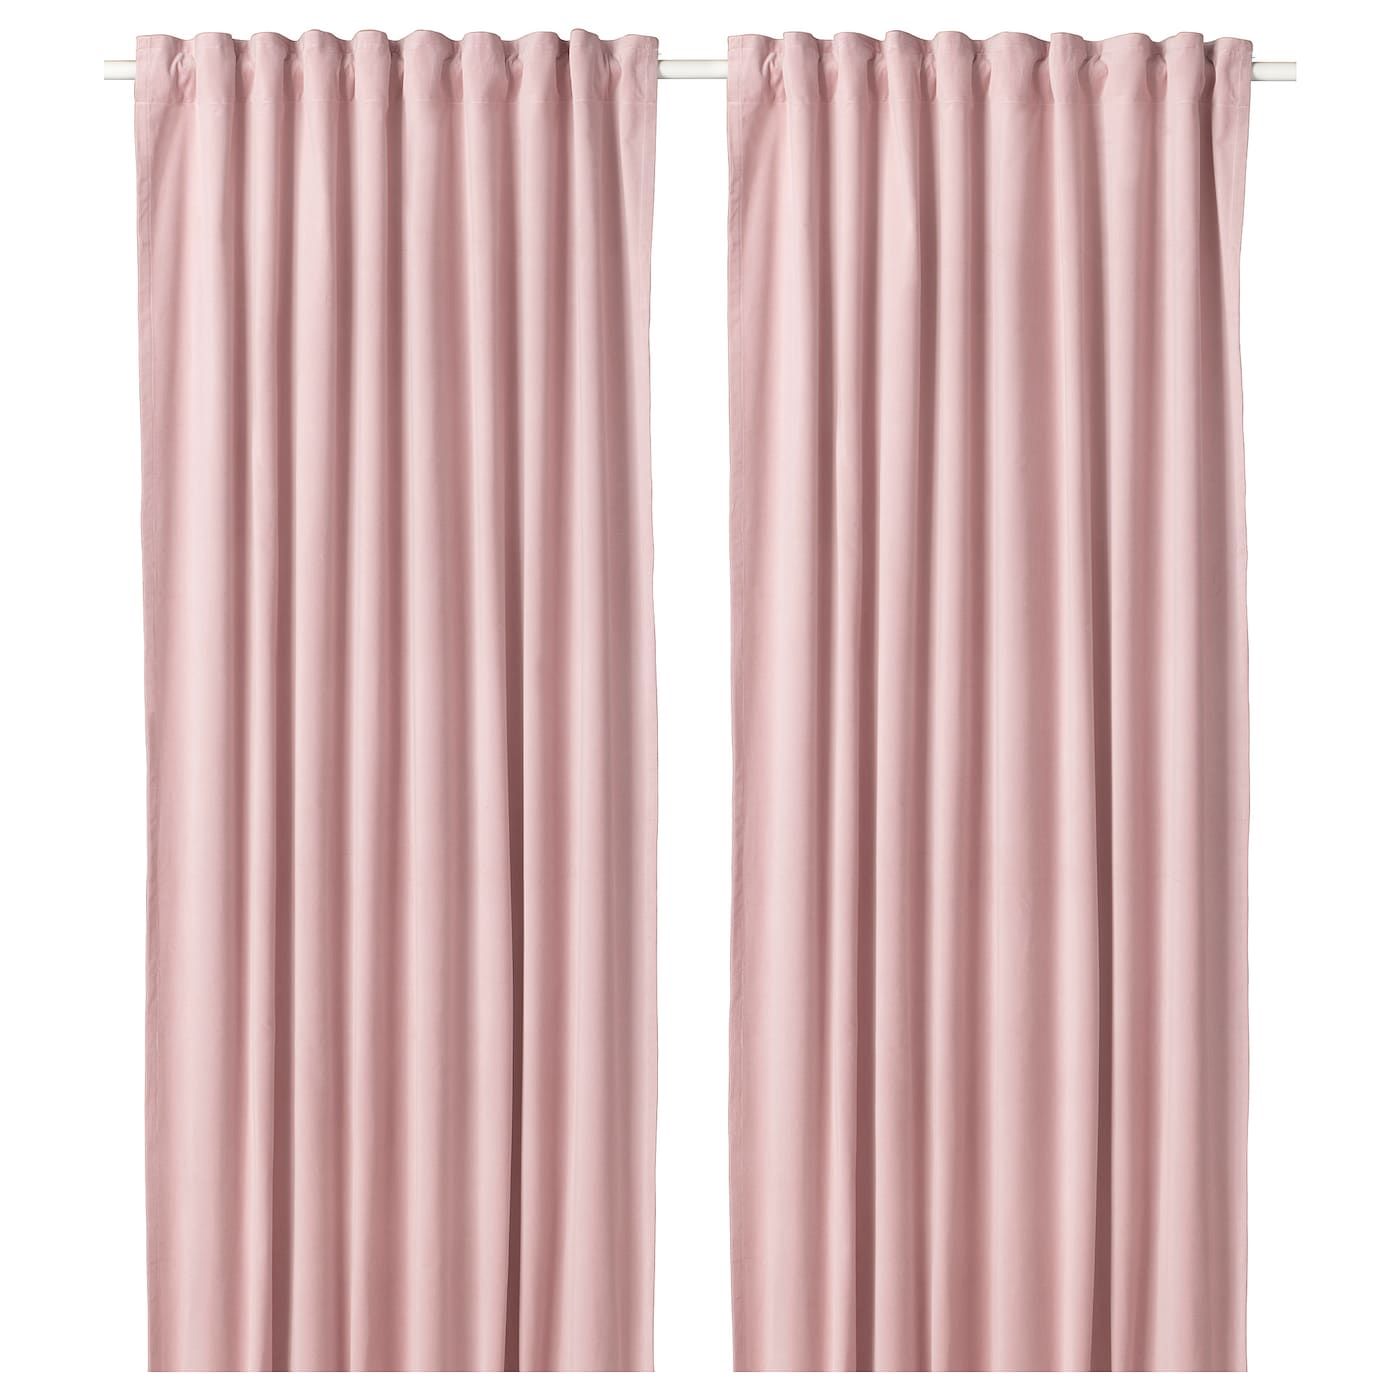 Add a Pop of Color to Your Space with Pink Curtains